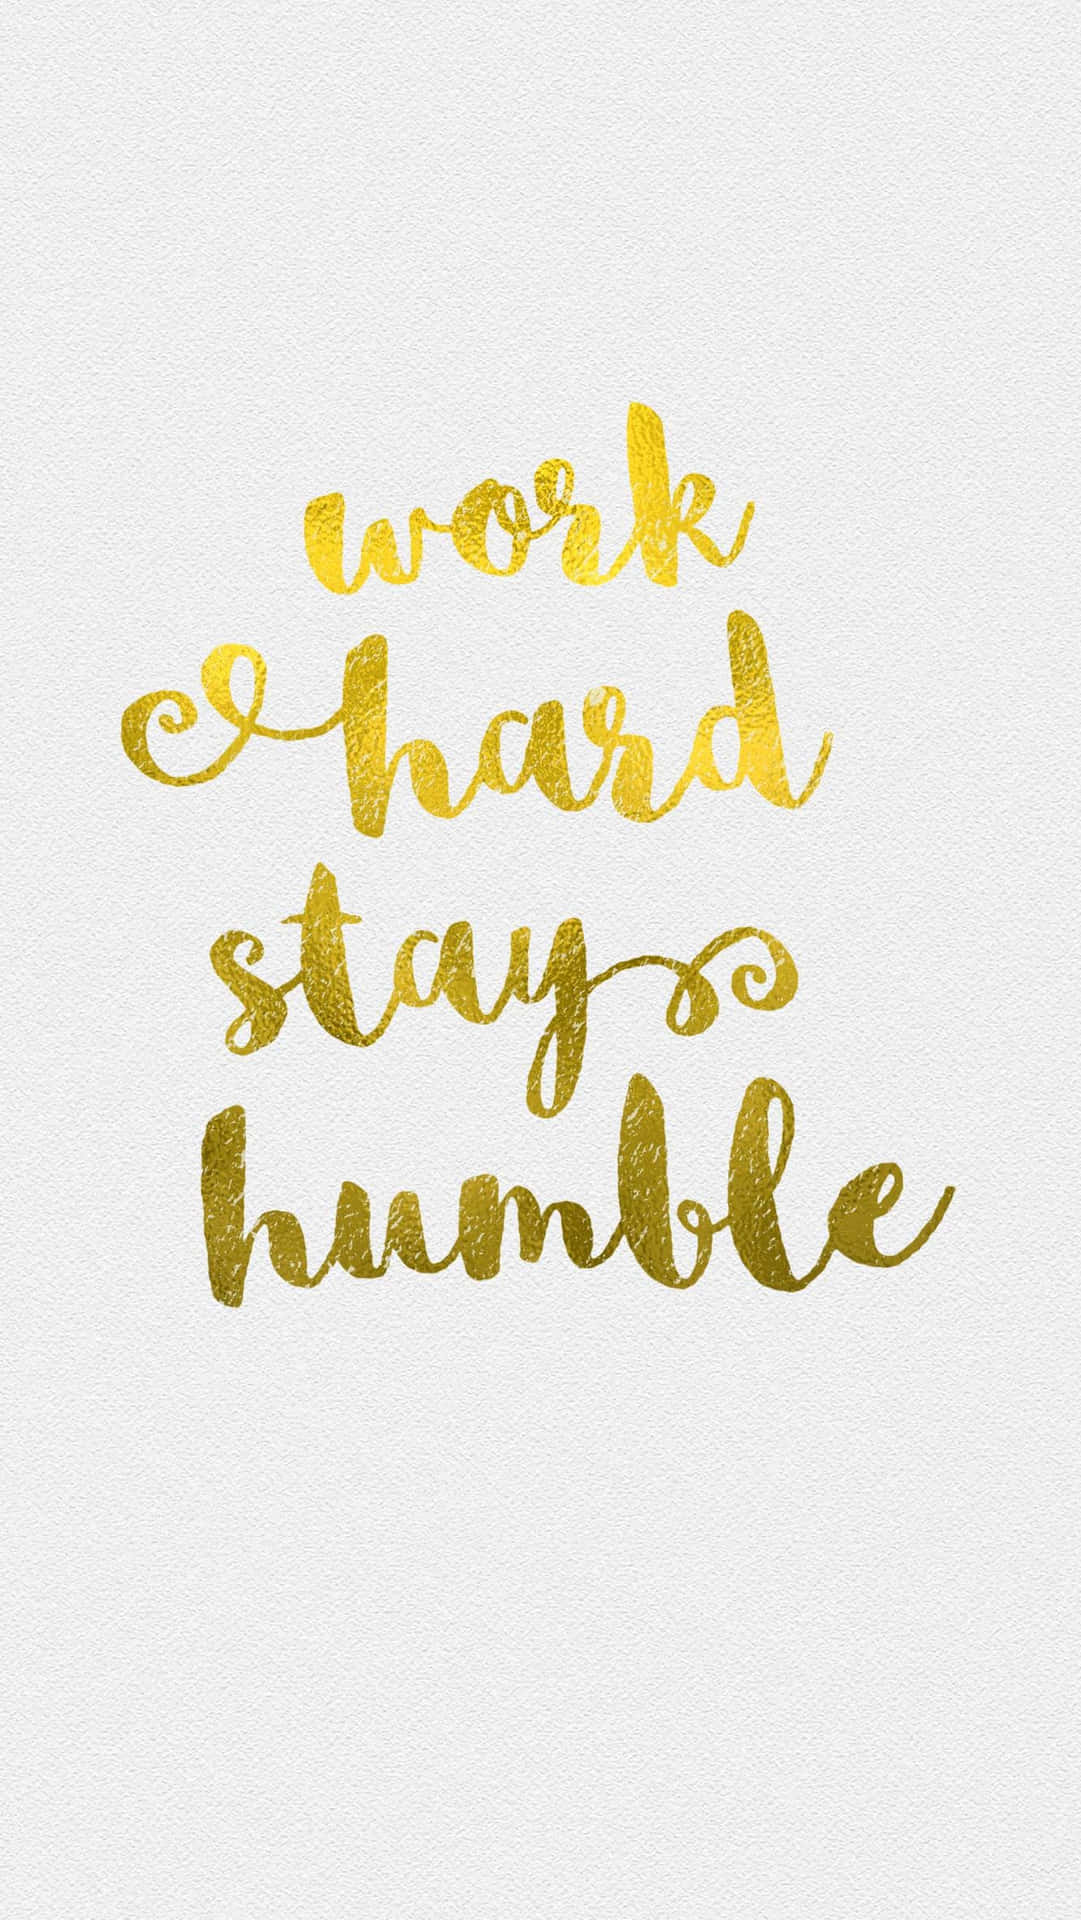 "Stay humble, stay kind." Wallpaper